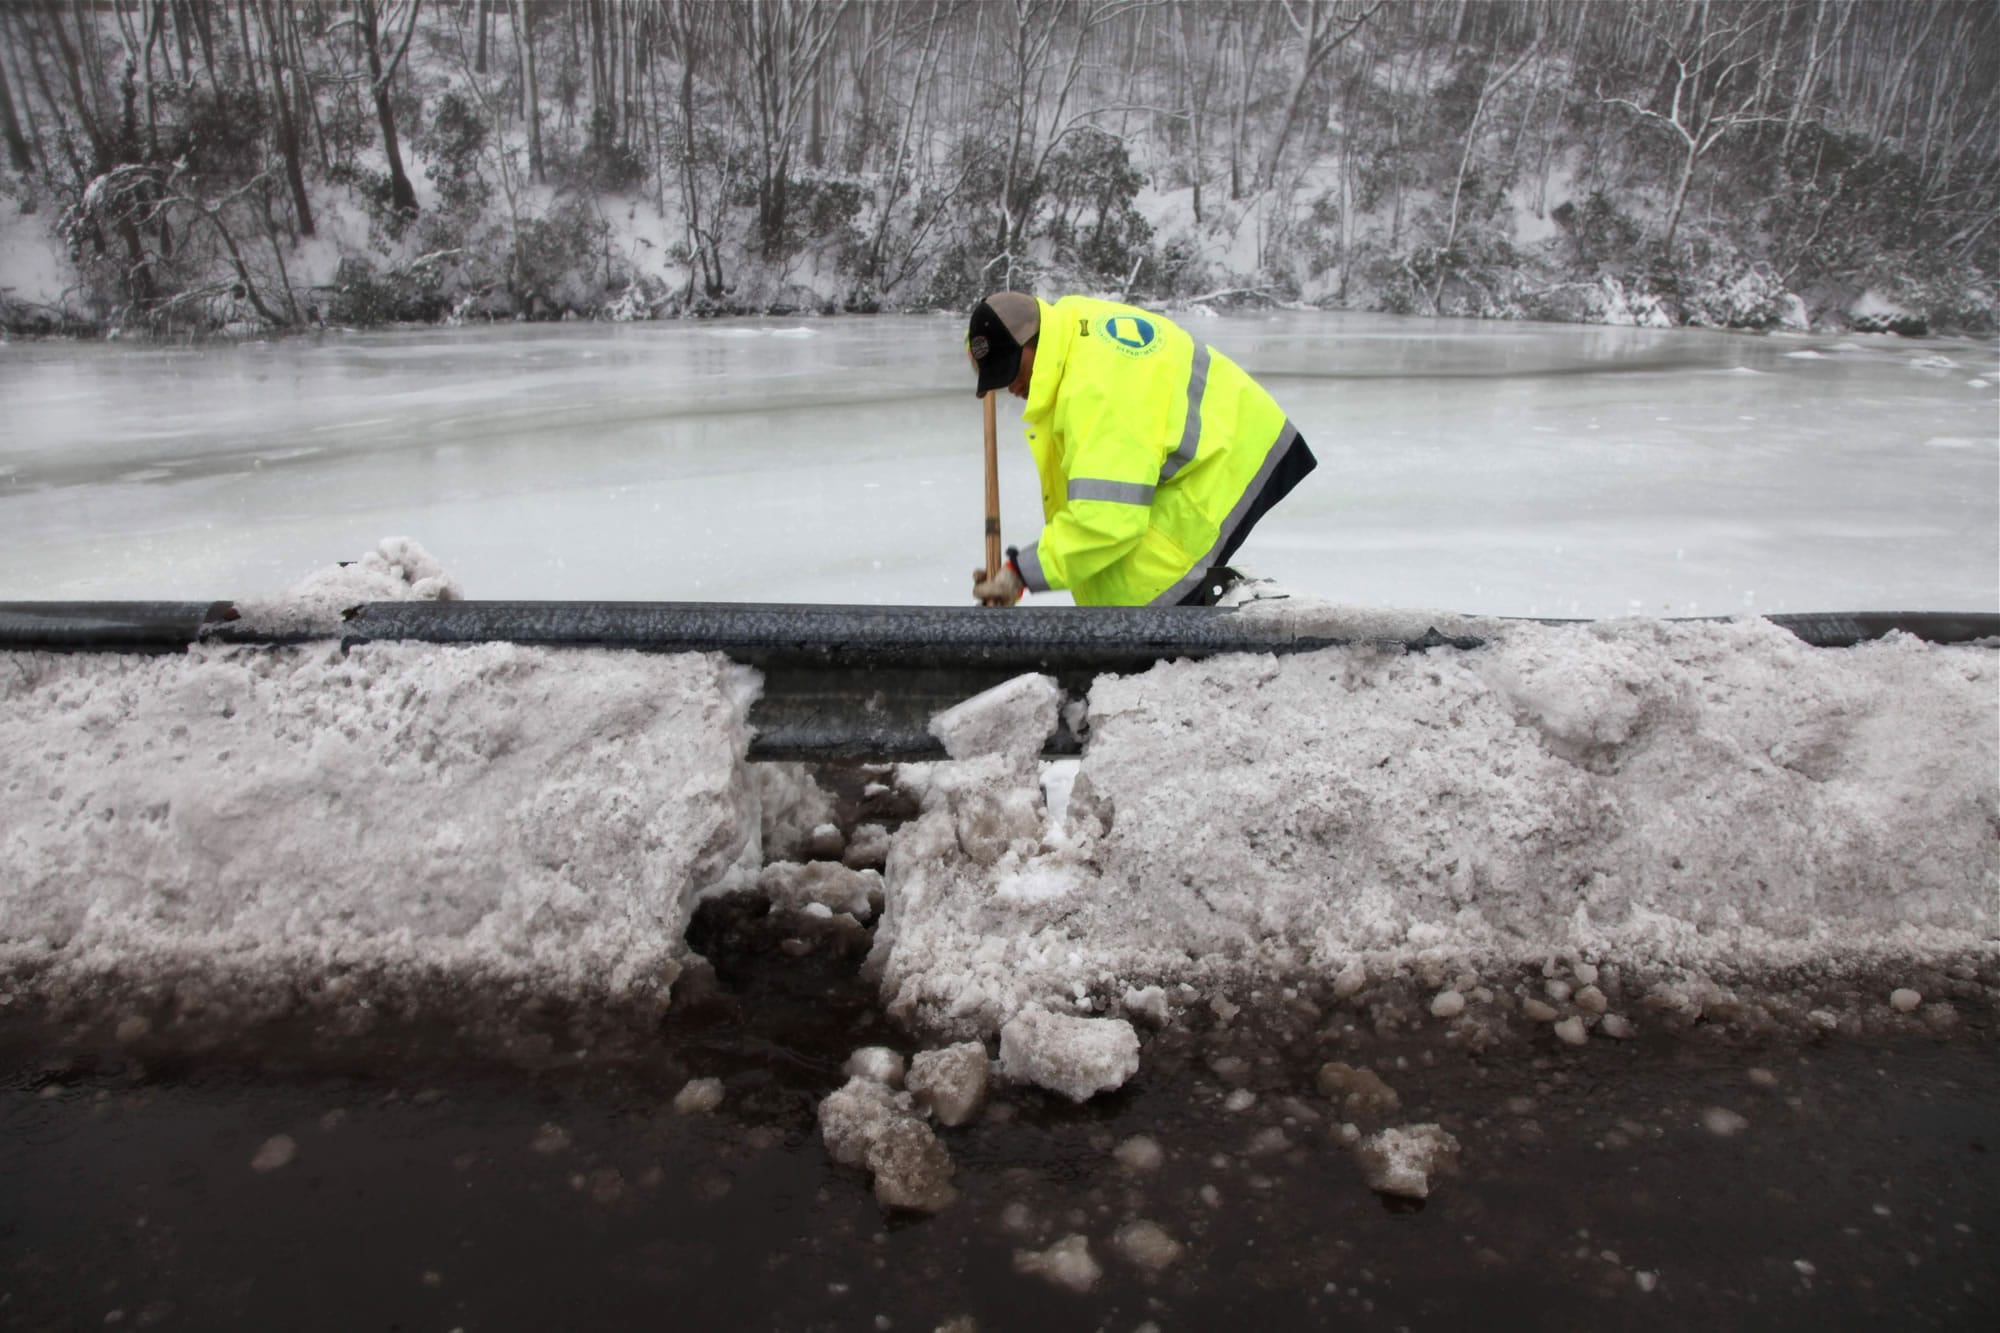 A state worker punches a hole in a snow berm Monday so standing water can drain off a bridge in East Lyme, Conn.